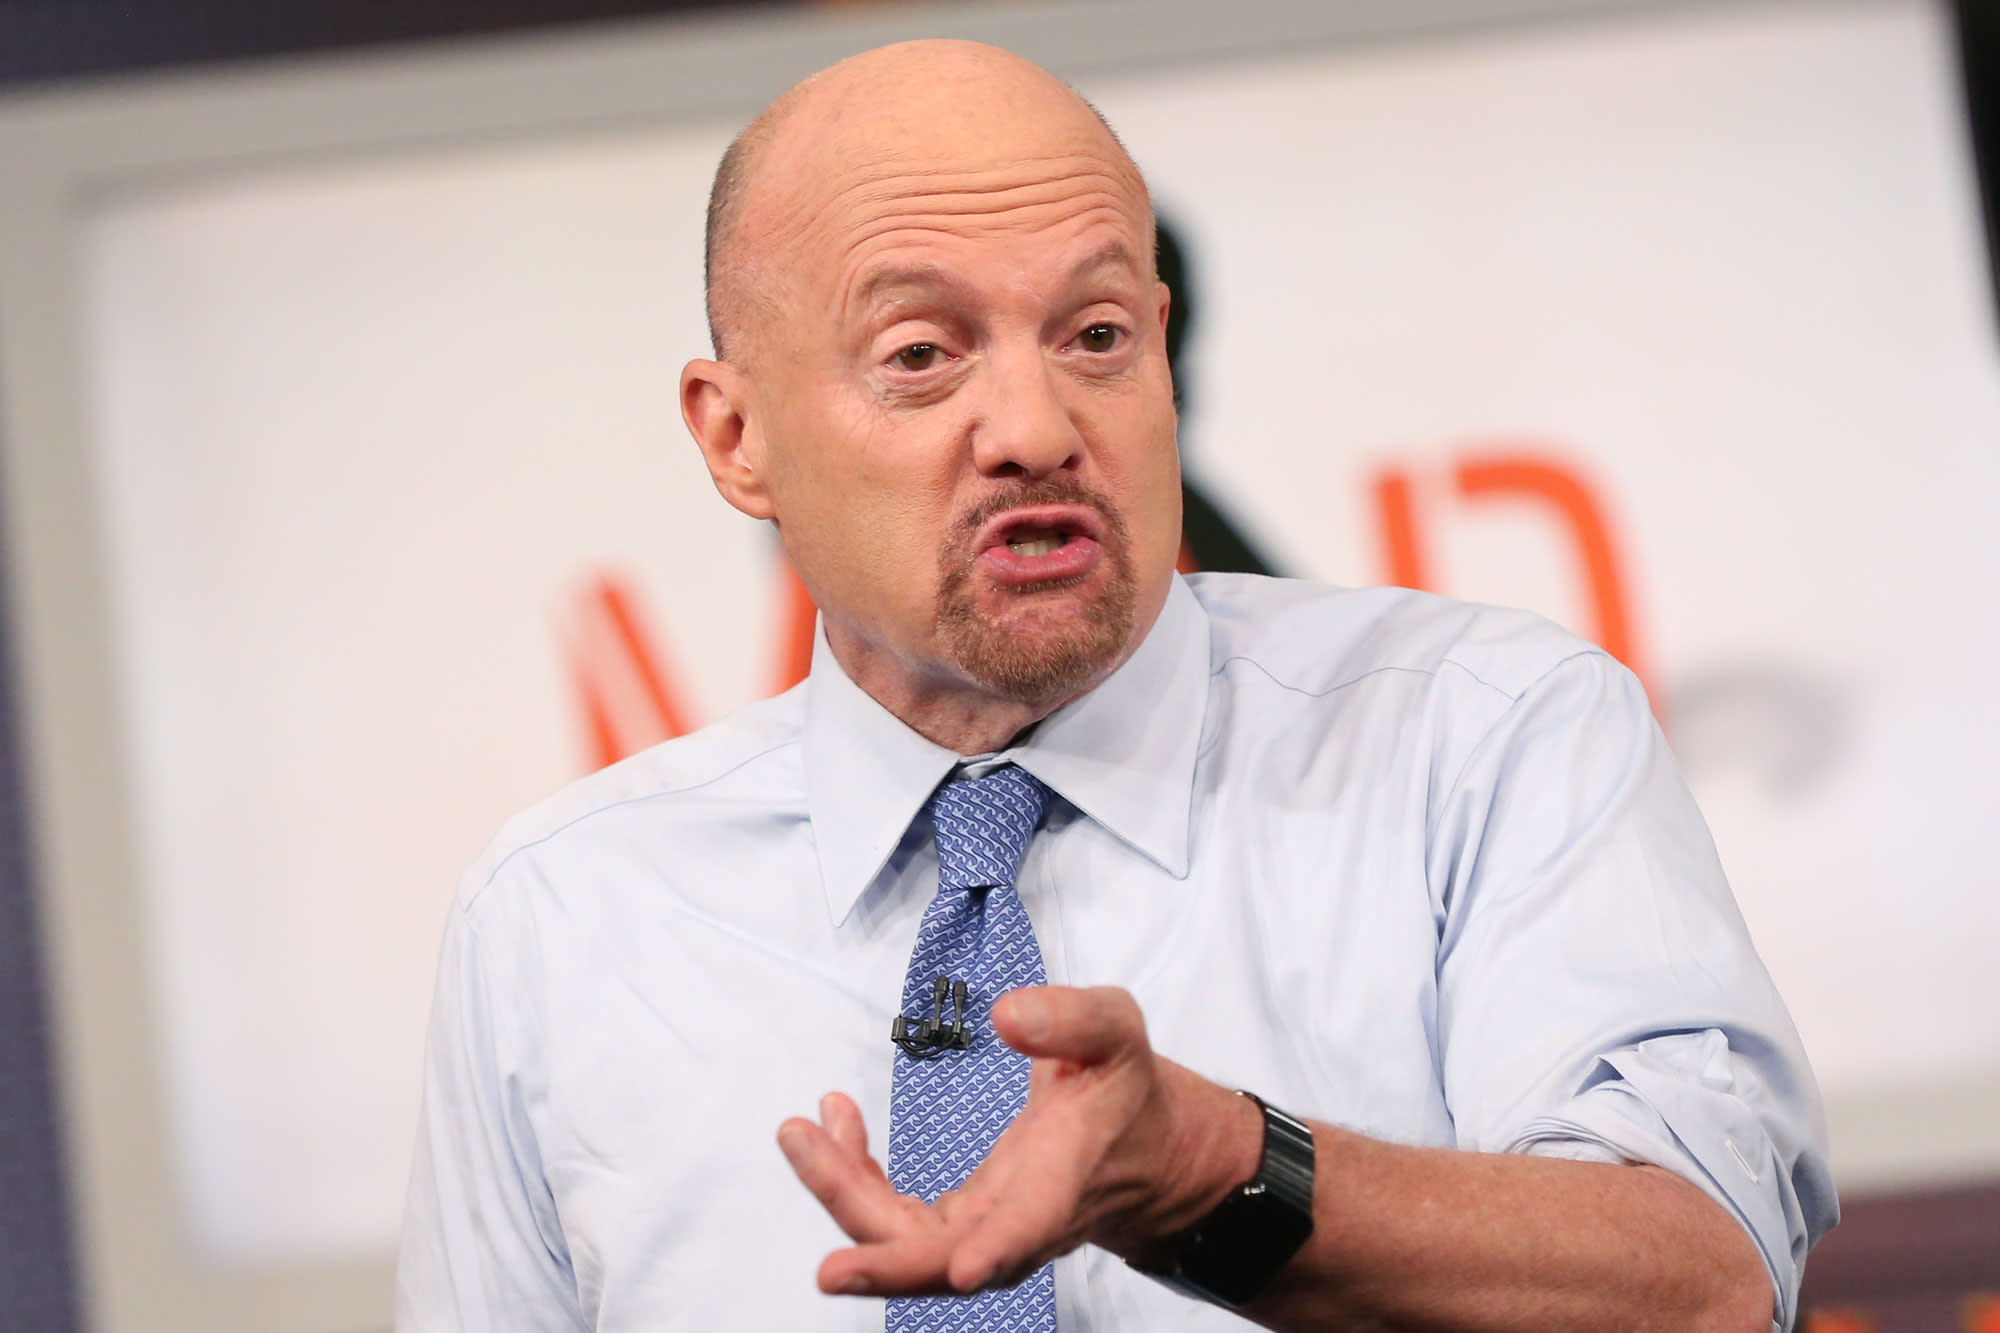 Jim Cramer’s playbook for investing during geopolitical uncertainty